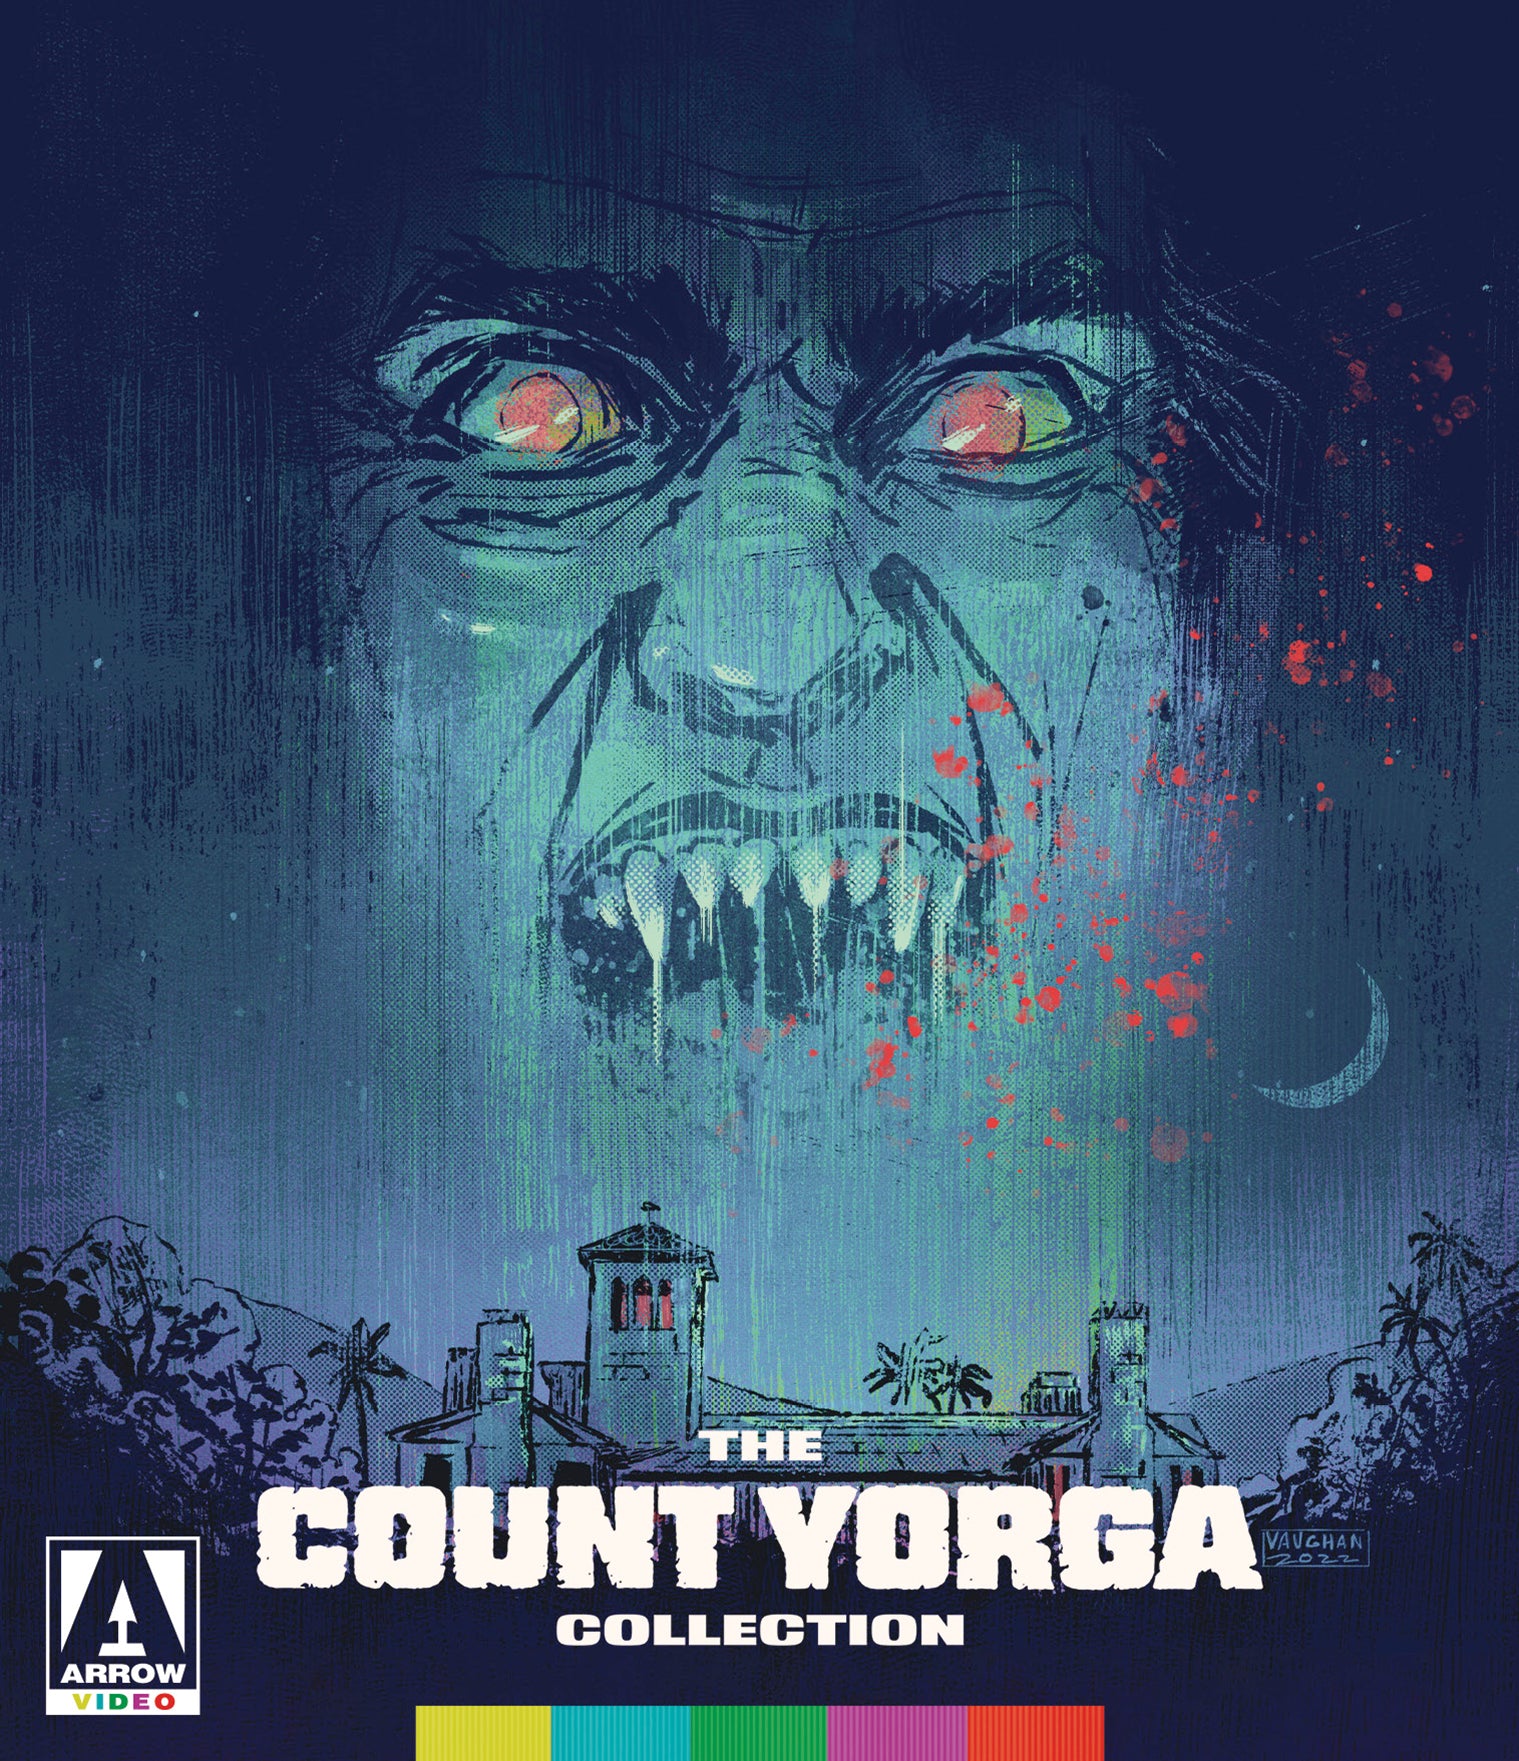 THE COUNT YORGA COLLECTION BLU-RAY